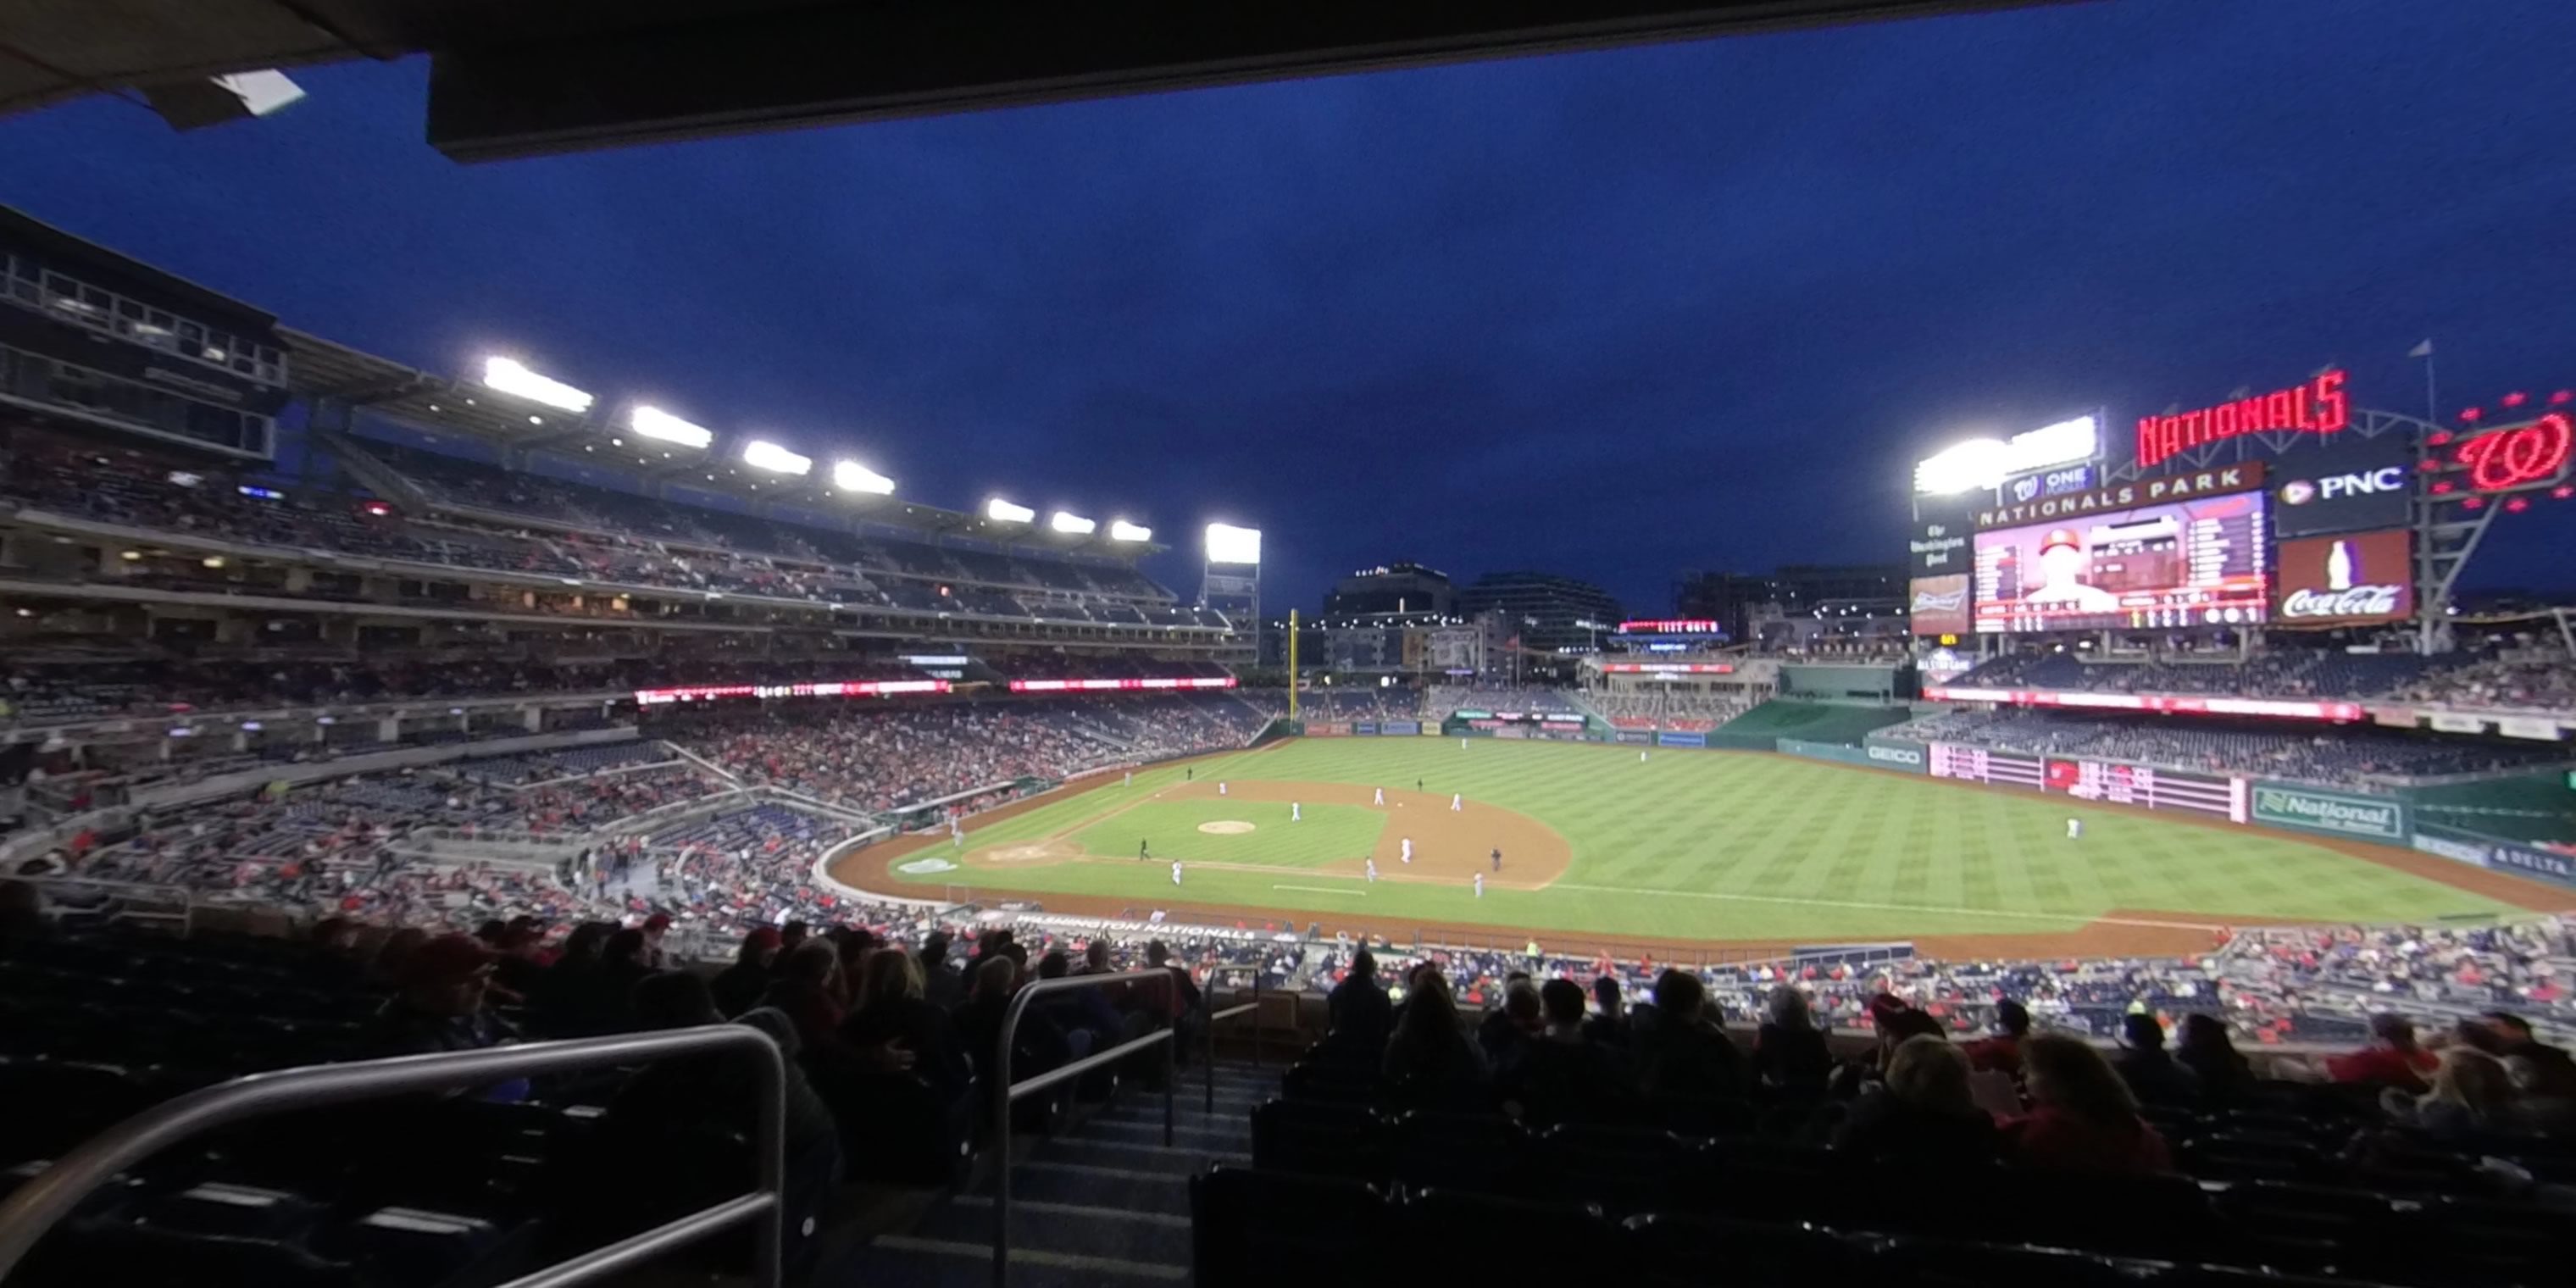 section 219 panoramic seat view  for baseball - nationals park